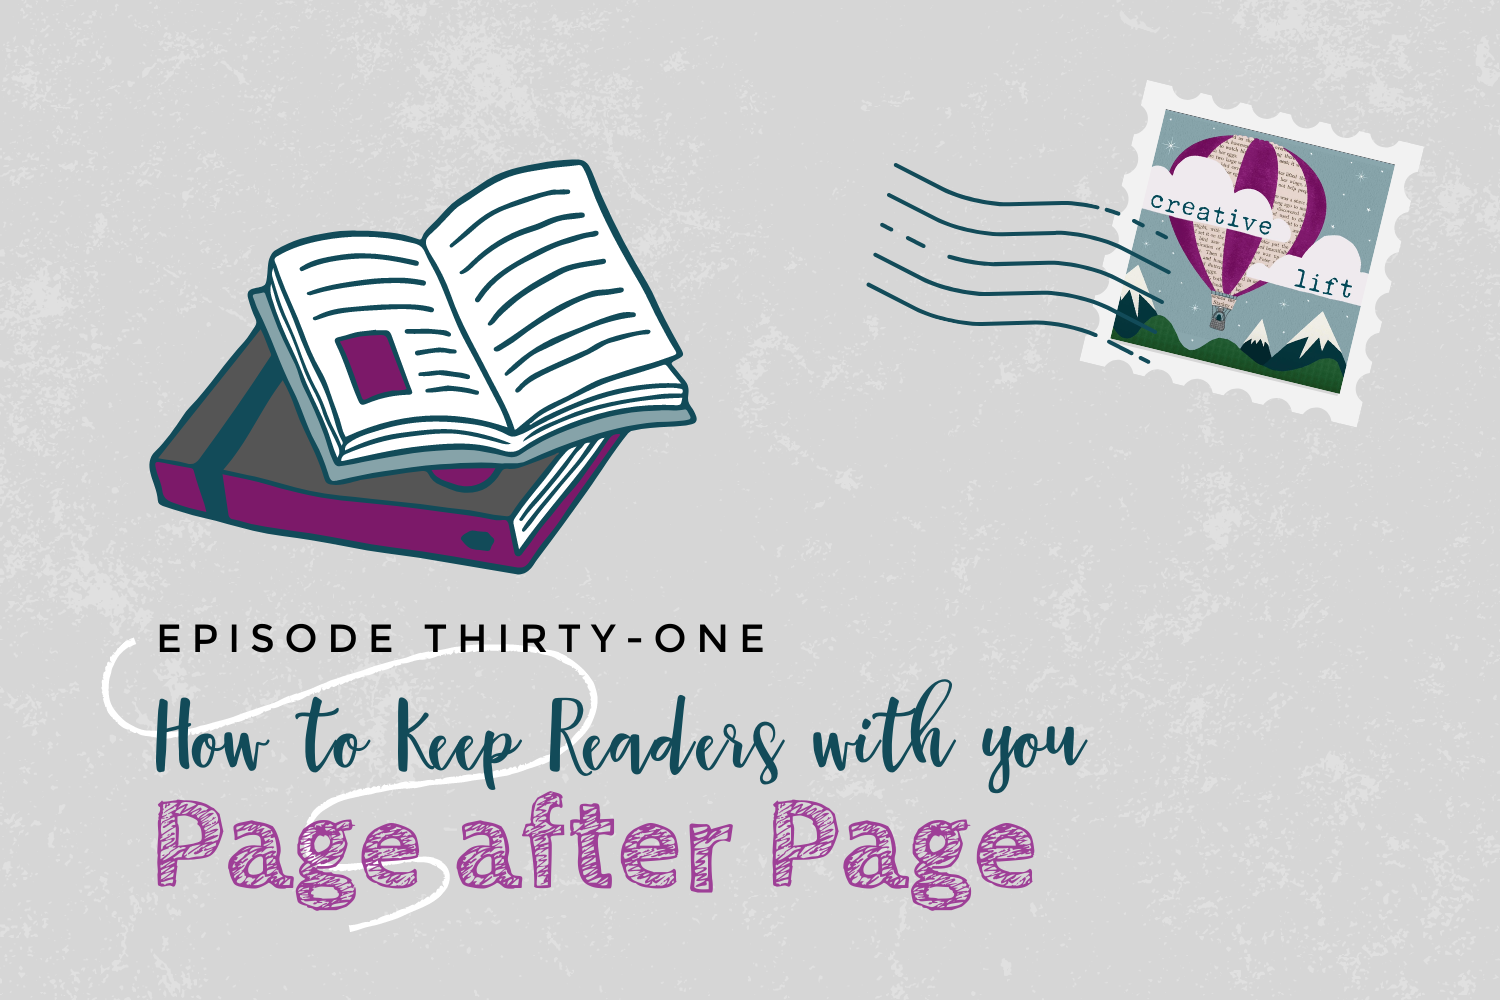 Creative Lift Episode 31- How to Keep Your Readers with you Page after Page